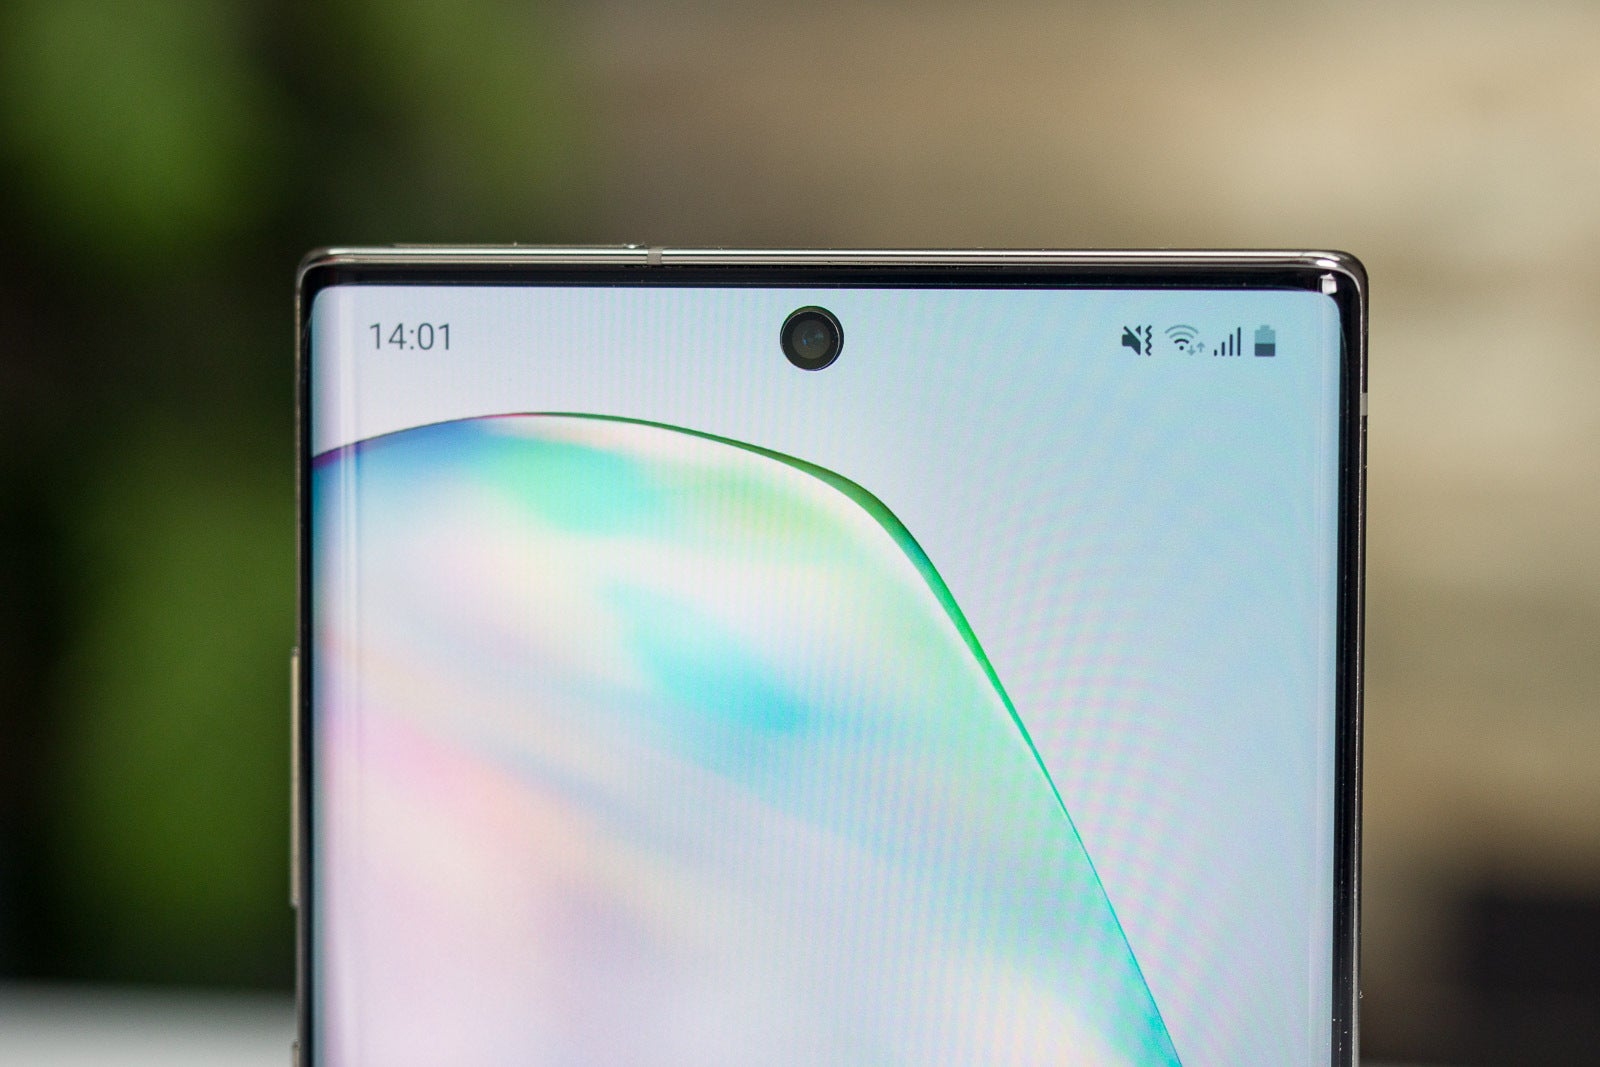 The Galaxy Note 10 Lite is coming soon as Samsung's cheaper Galaxy Note